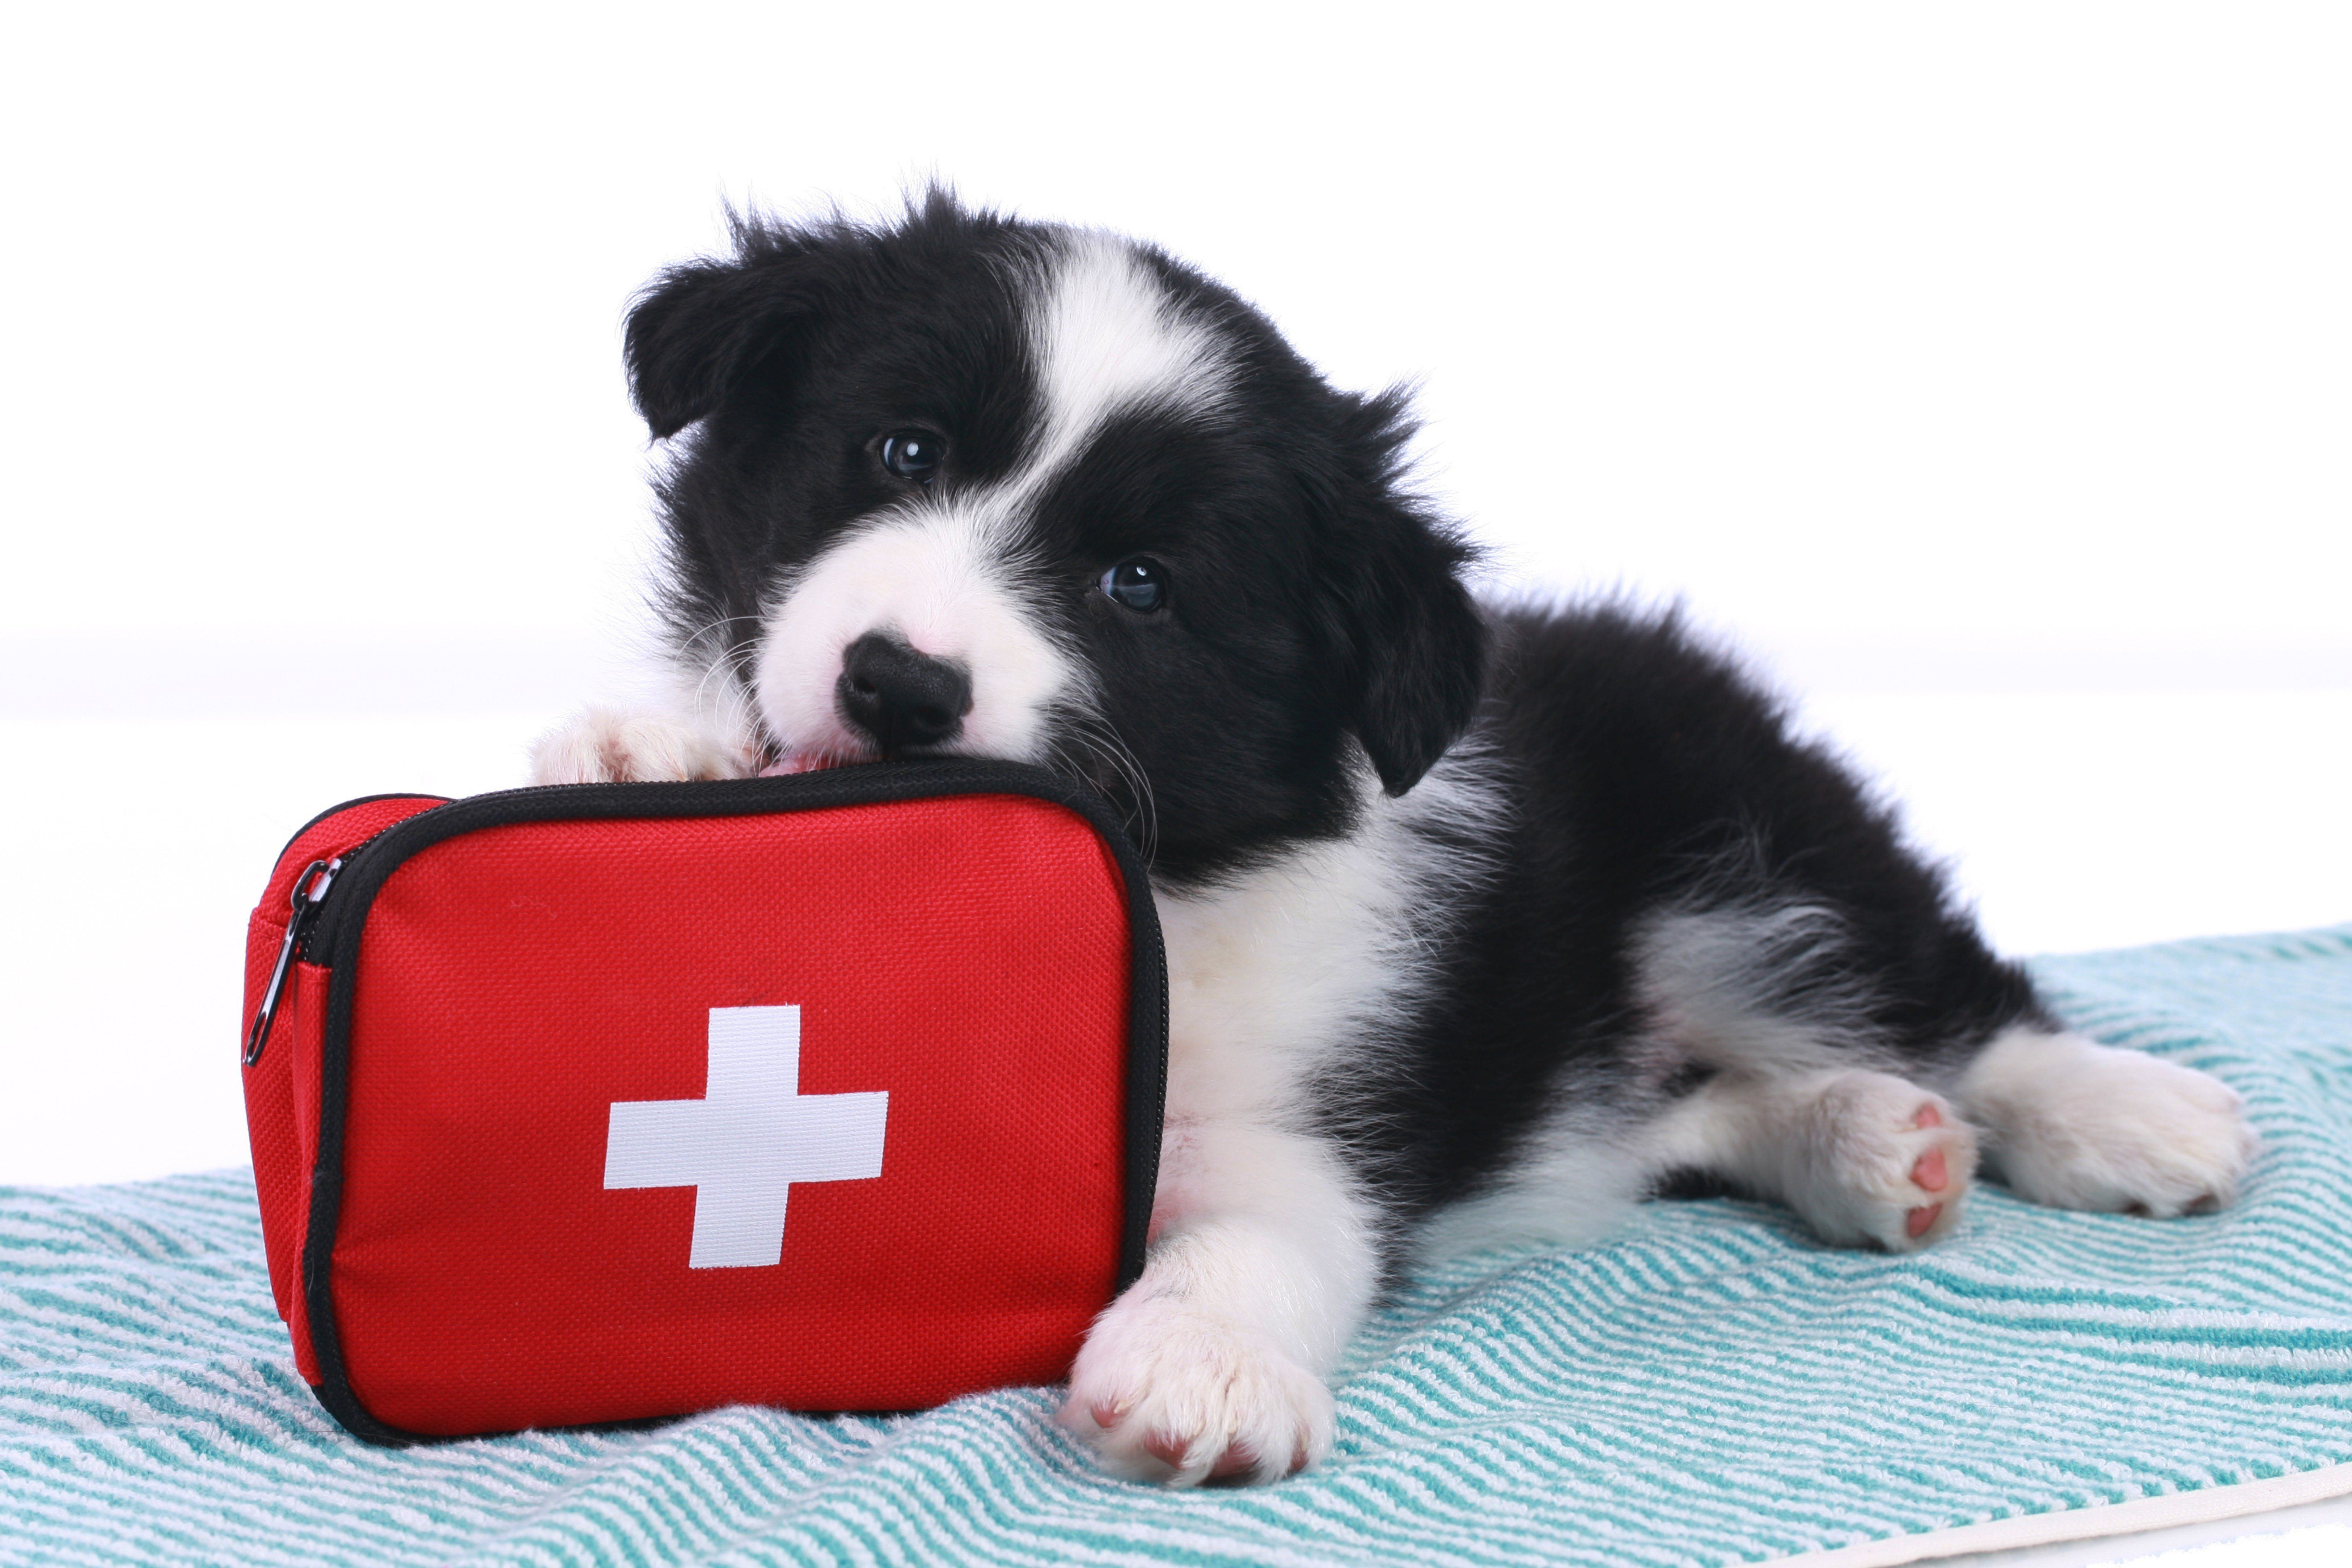 Handling Common Emergencies: A Pet First Aid Guide